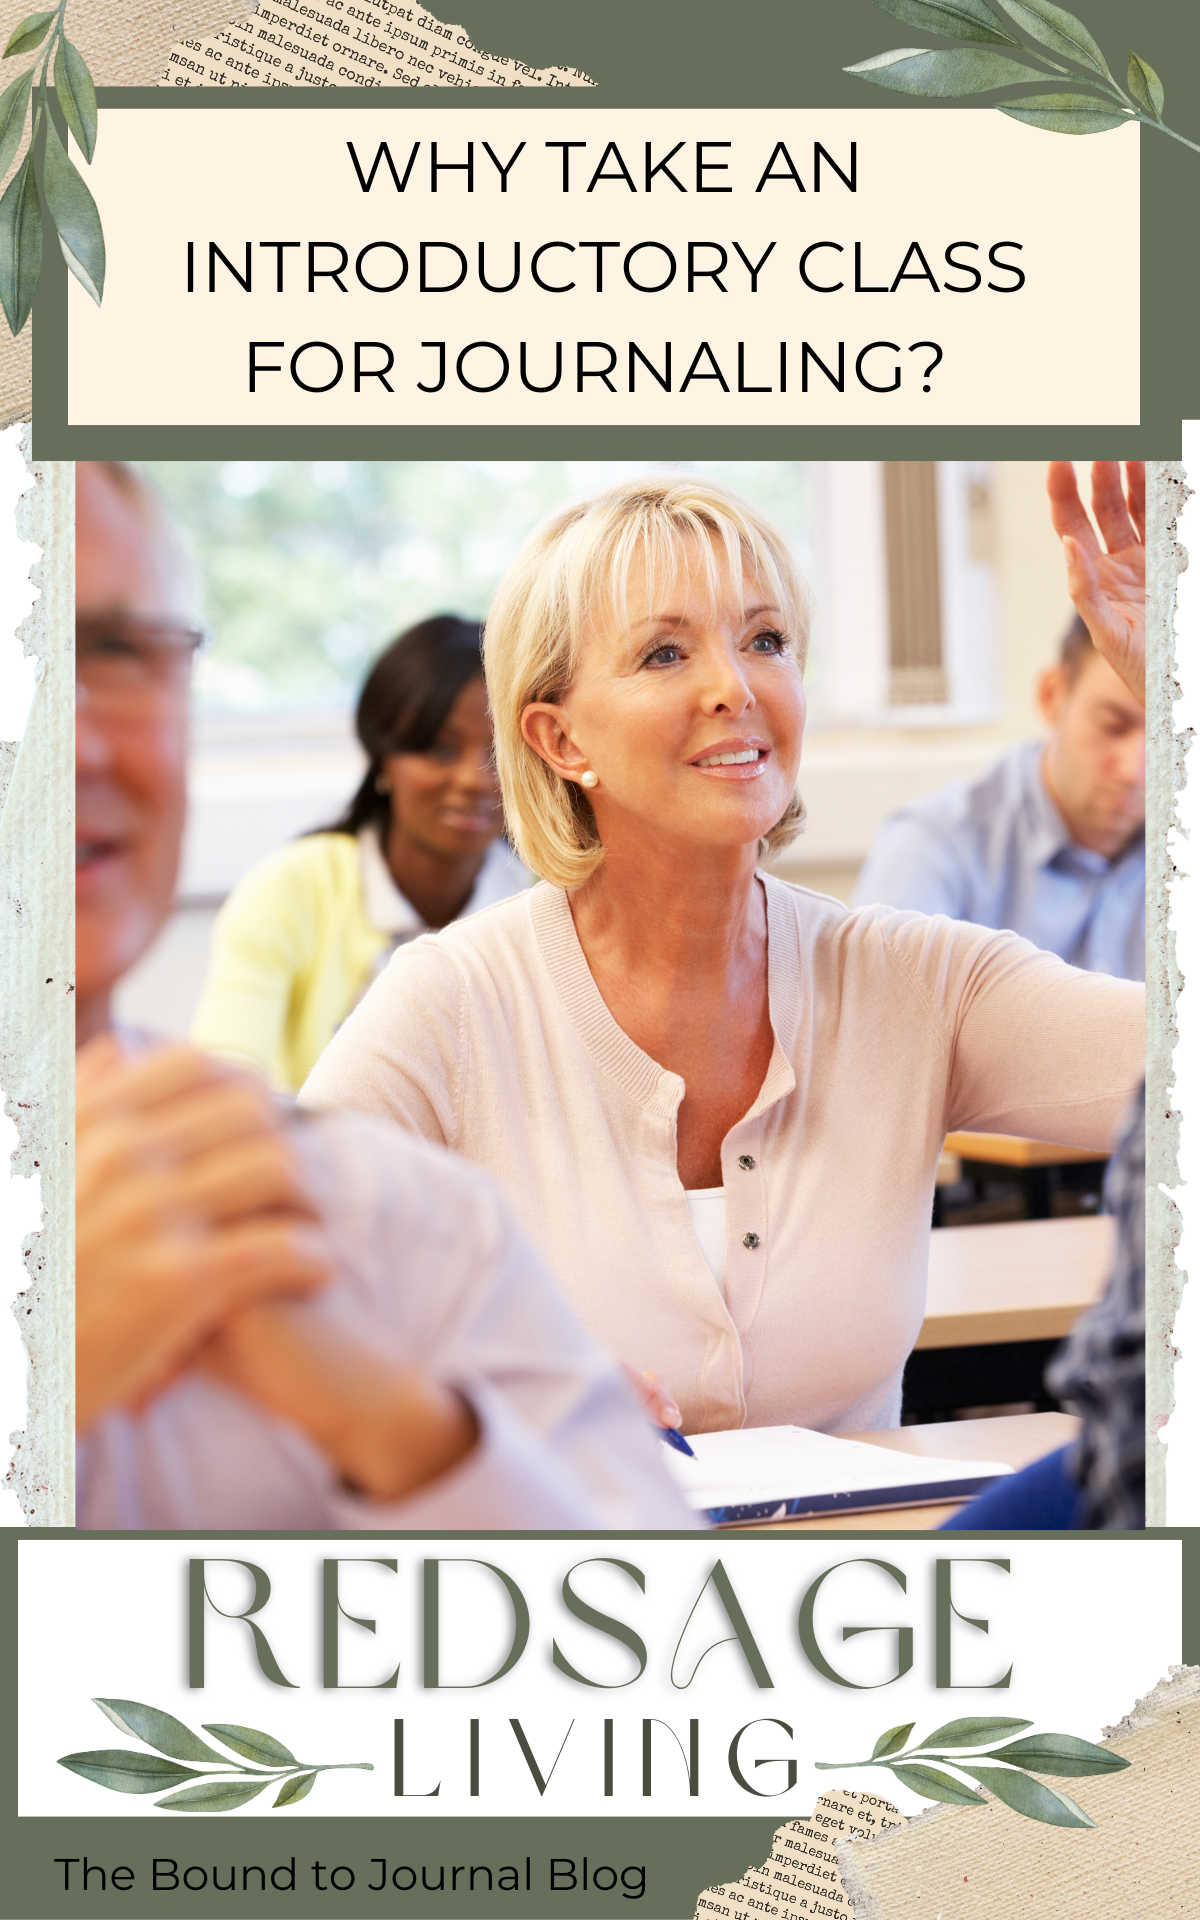 Older woman with other male and female smiling students in a class setting raising her hand image for blog post titled:  Why Take an Introductory Class for Journaling? 